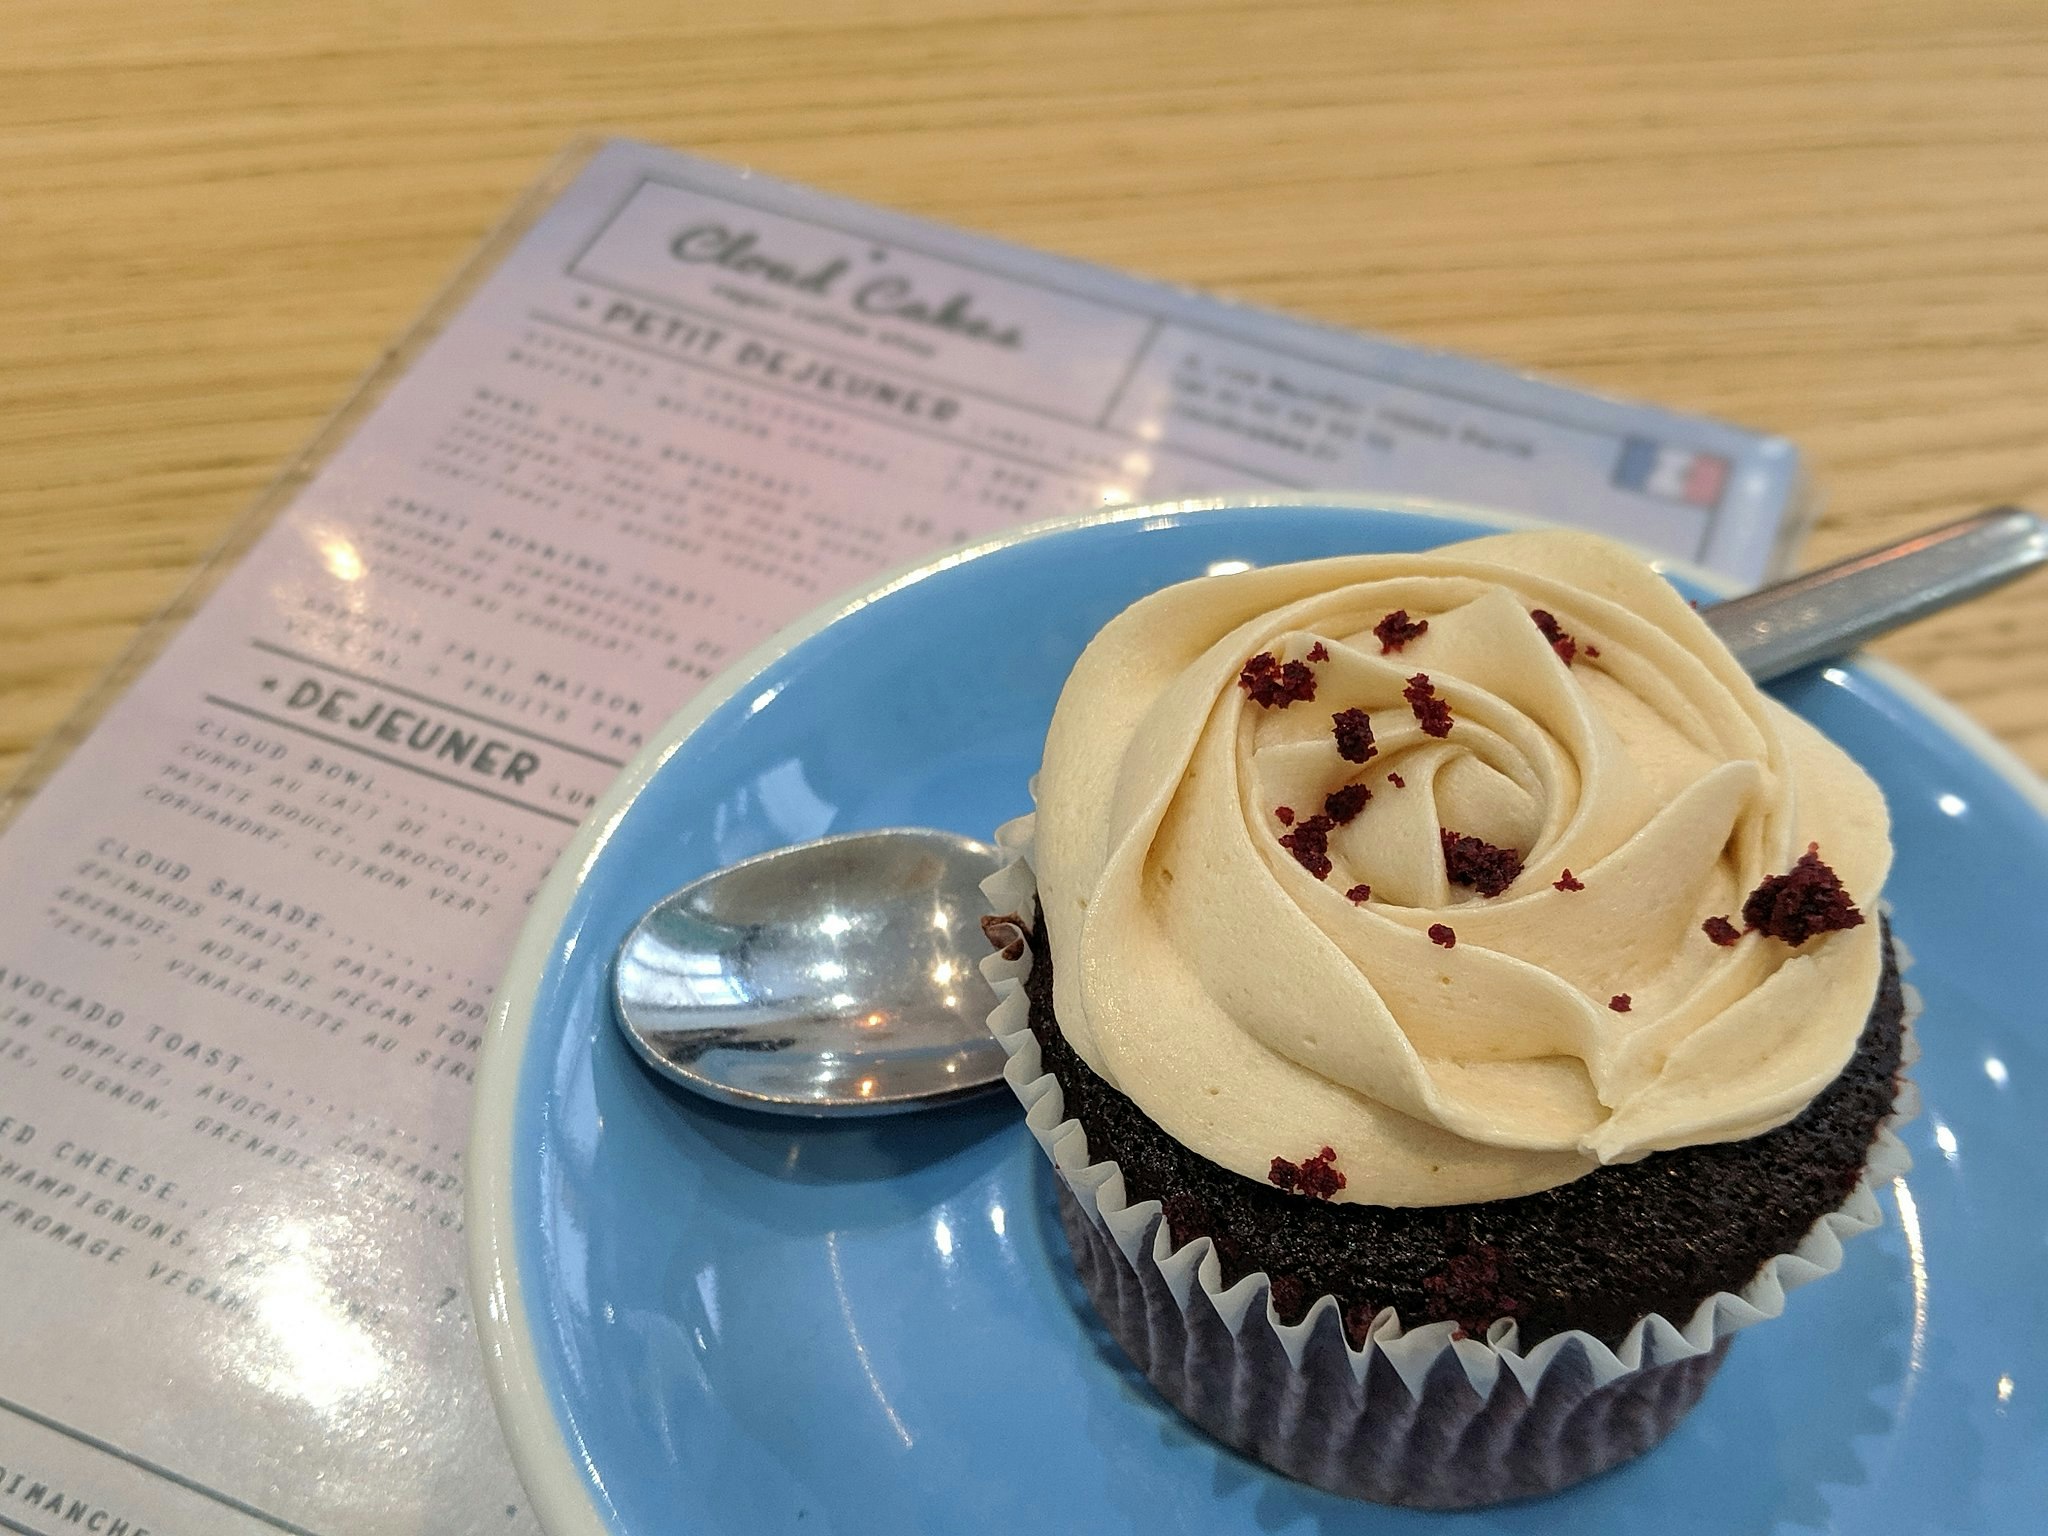 A chocolate-coloured muffin with cream frosting on a blue plate with a silver spoon next to a menu.